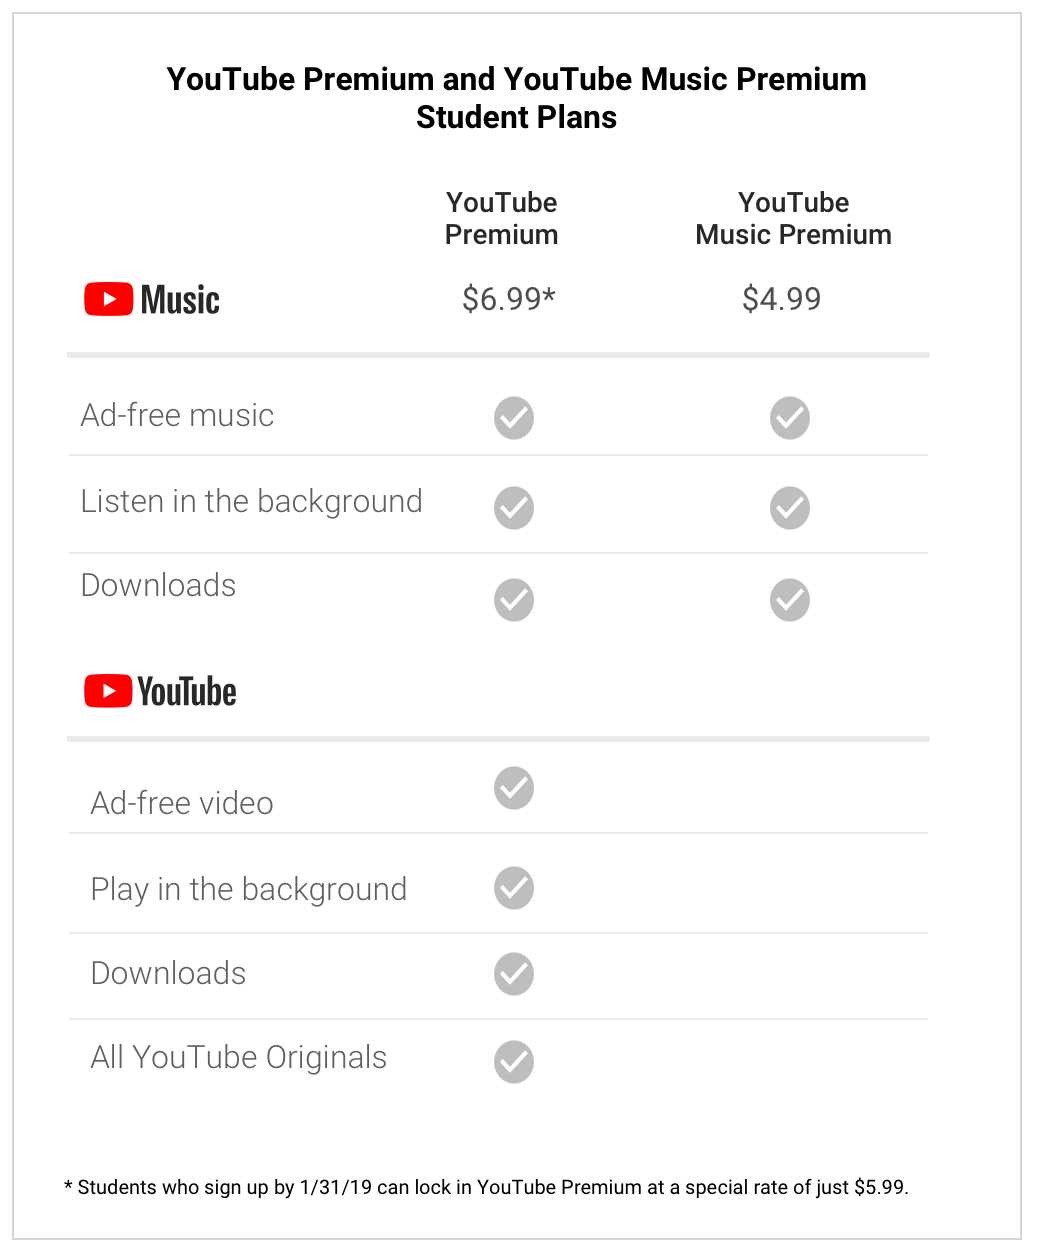 Everything You Need to Know About YouTube Premium Student